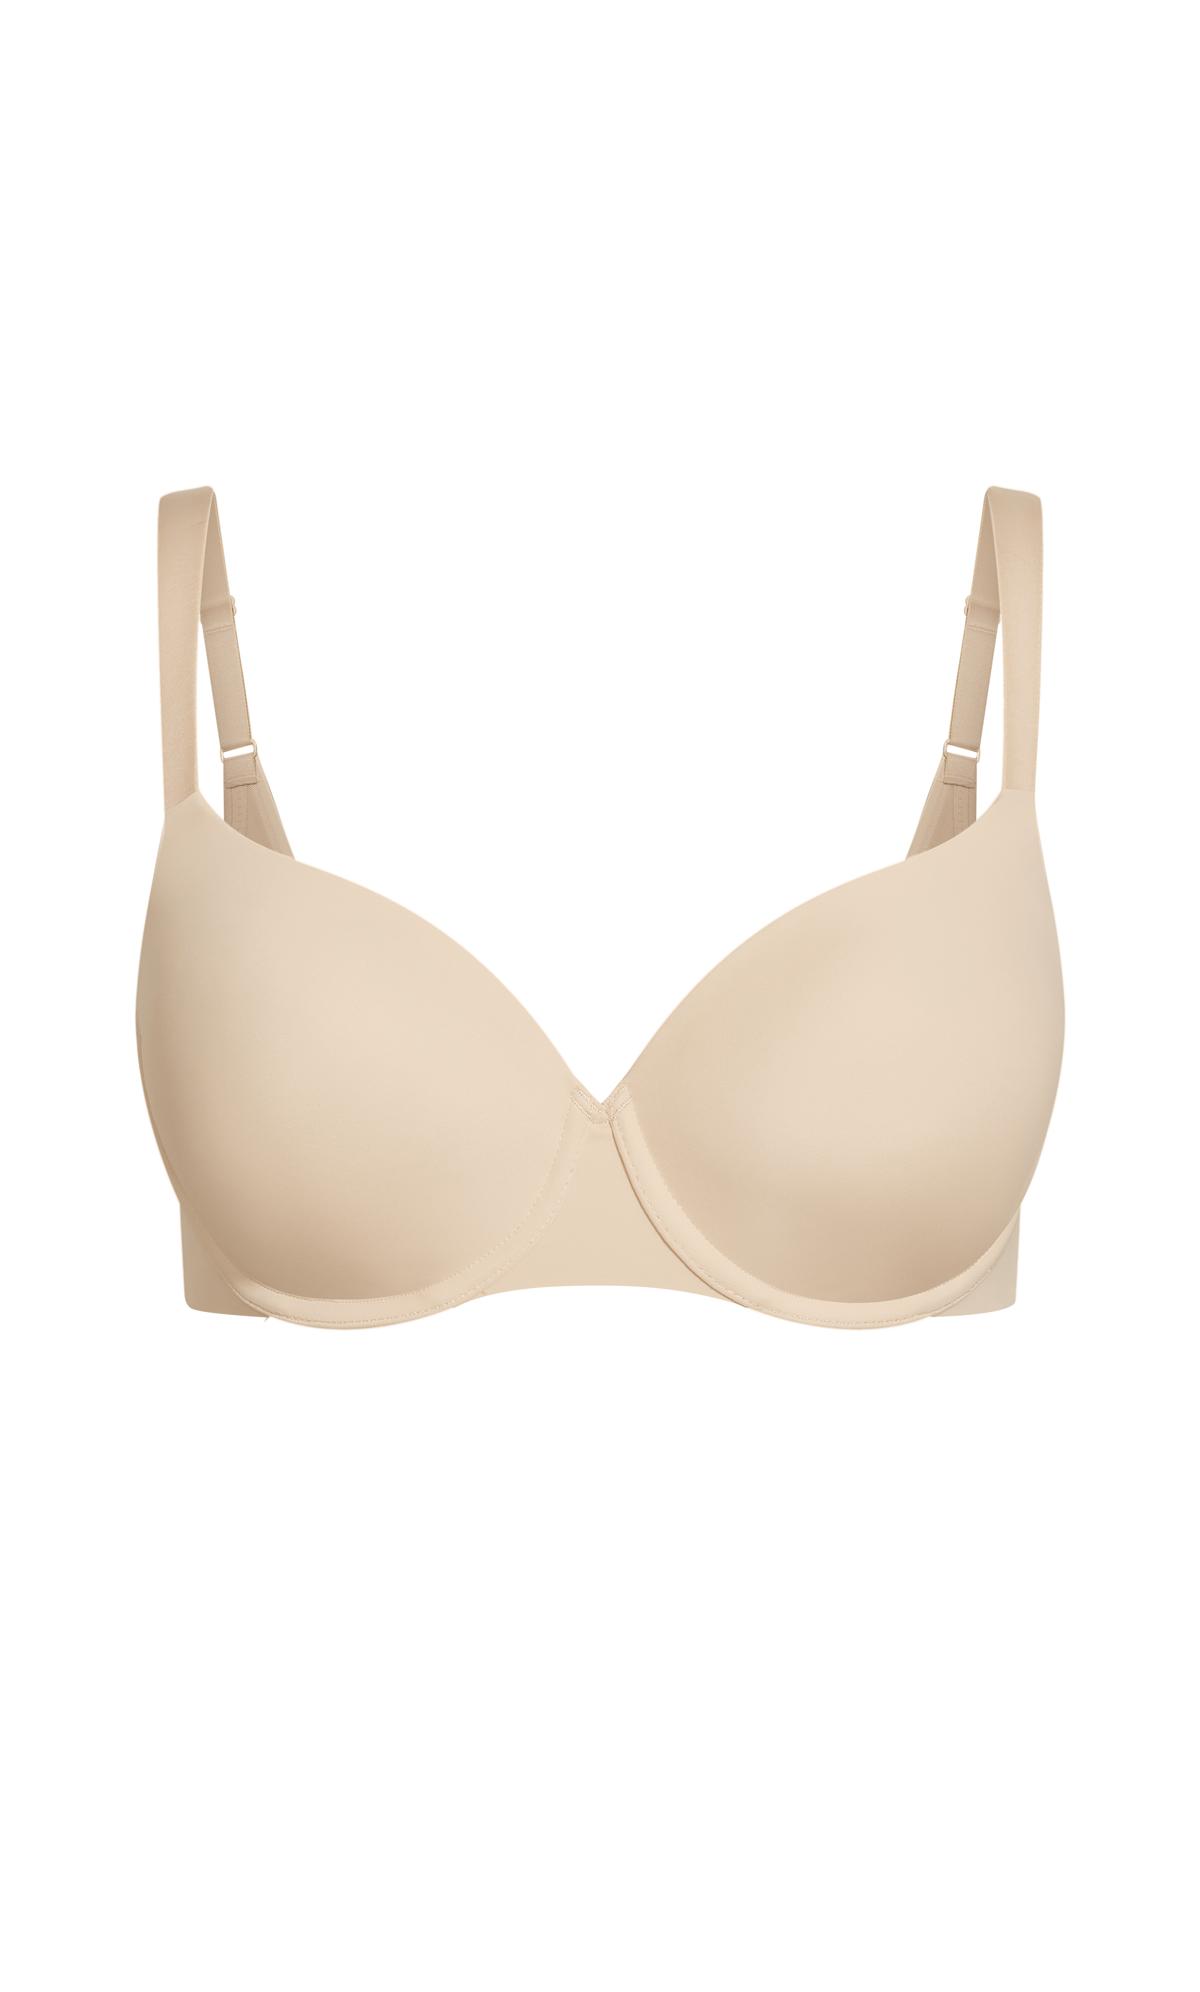 Hips and Curves Latte Brown T-Shirt Bra 3